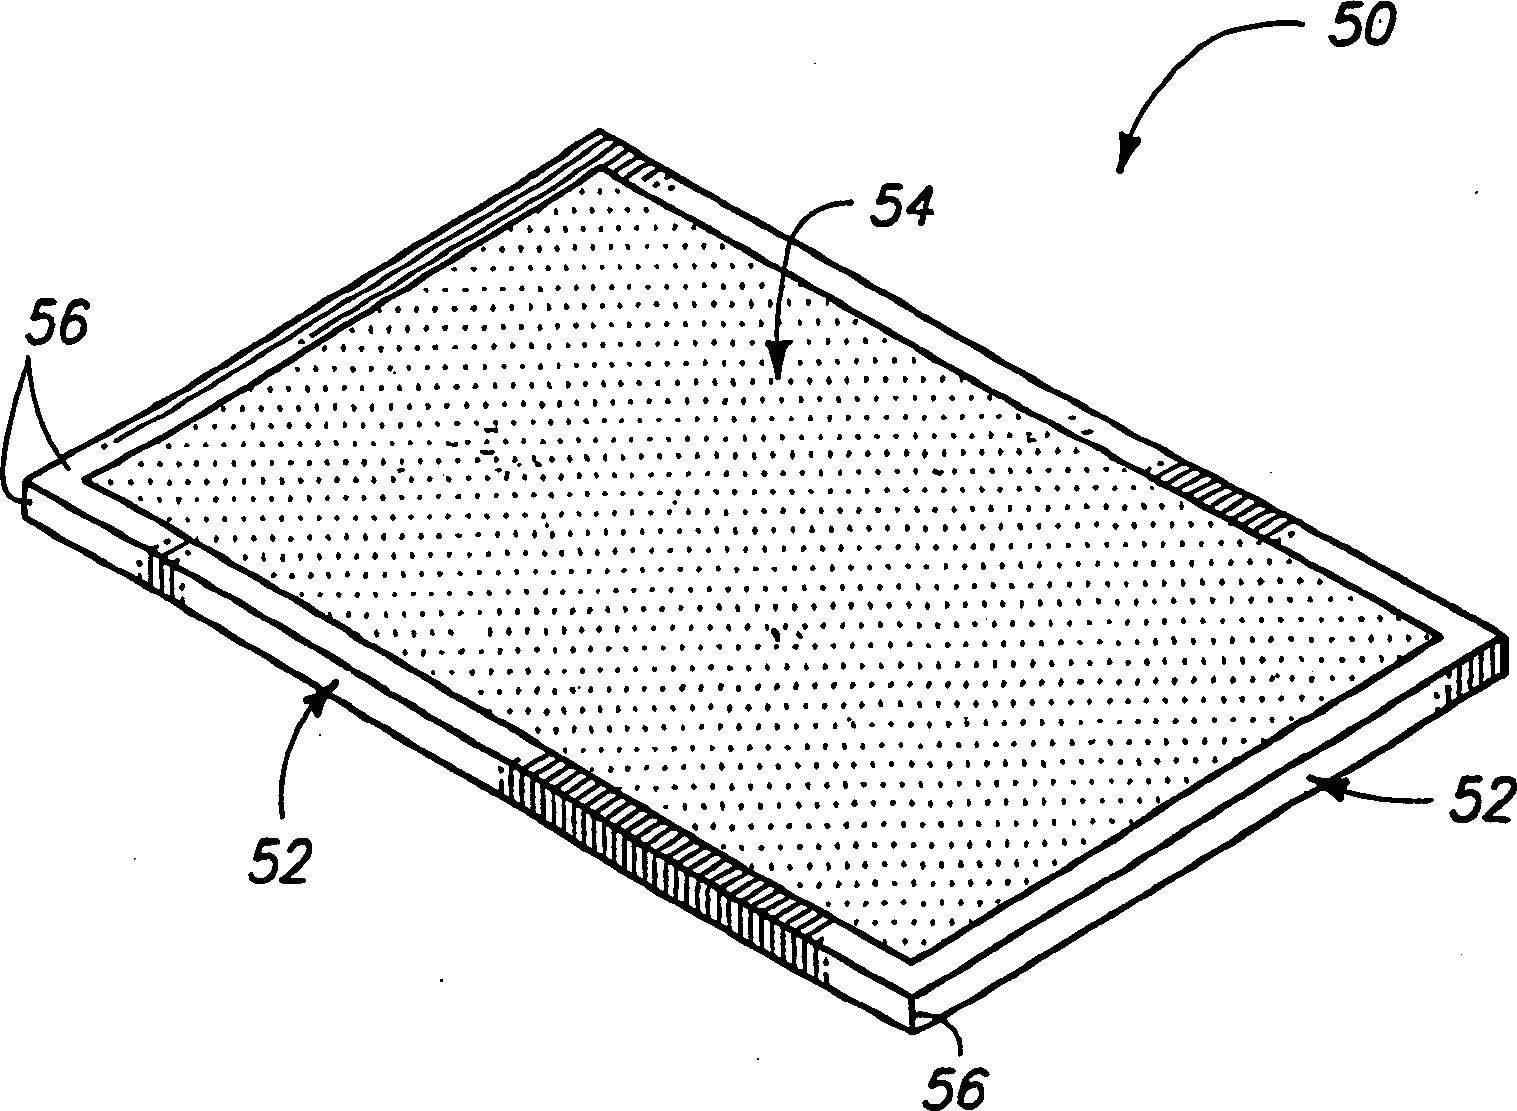 Method and apparatus for processing metals, and the metals so produced